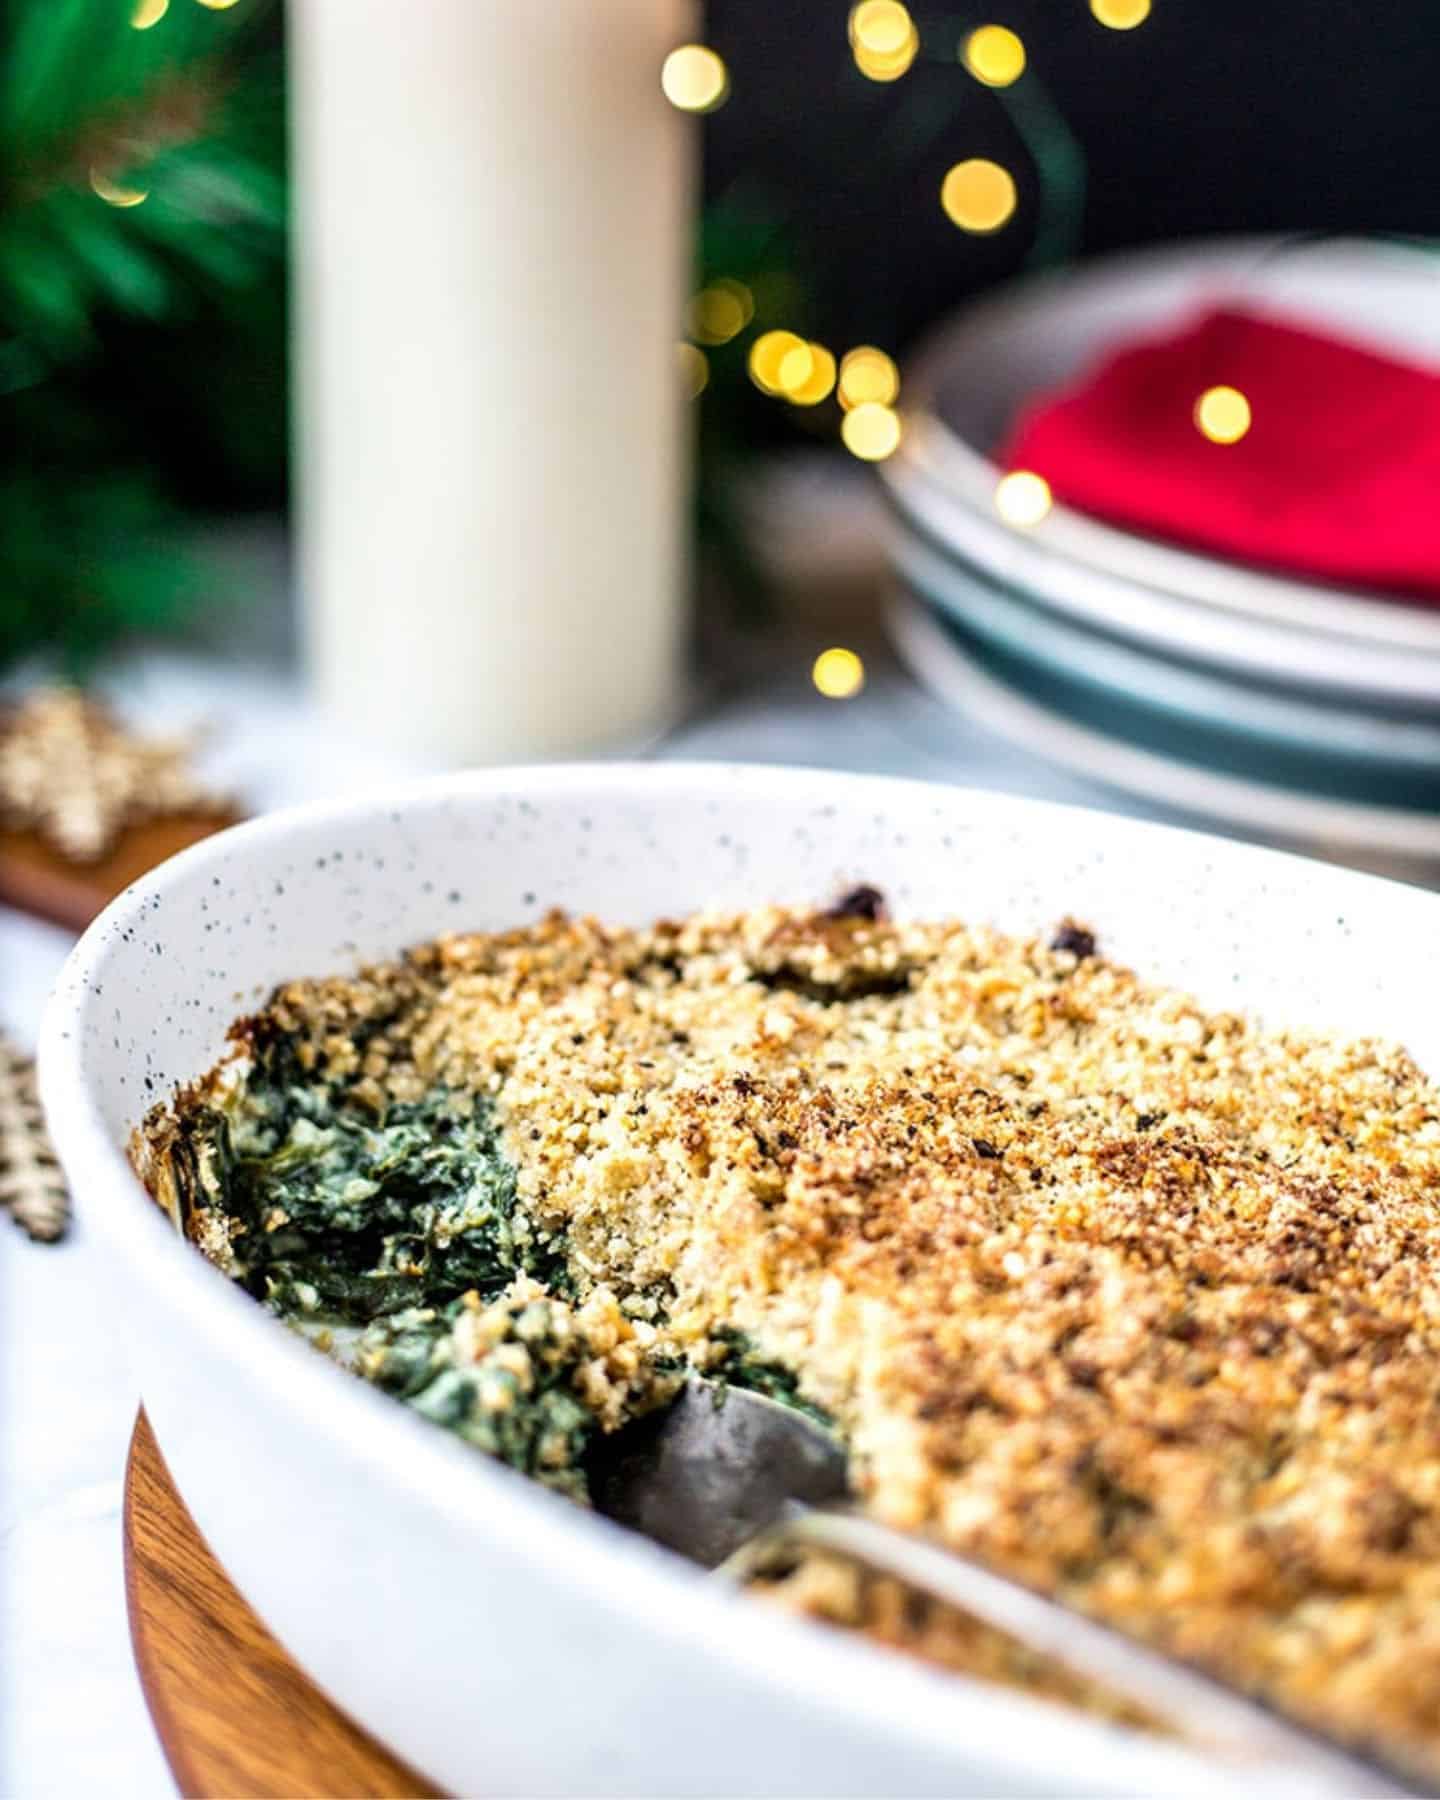 Creamed spinach gratin in an oven dish with a candle and Christmas tree branches in the background